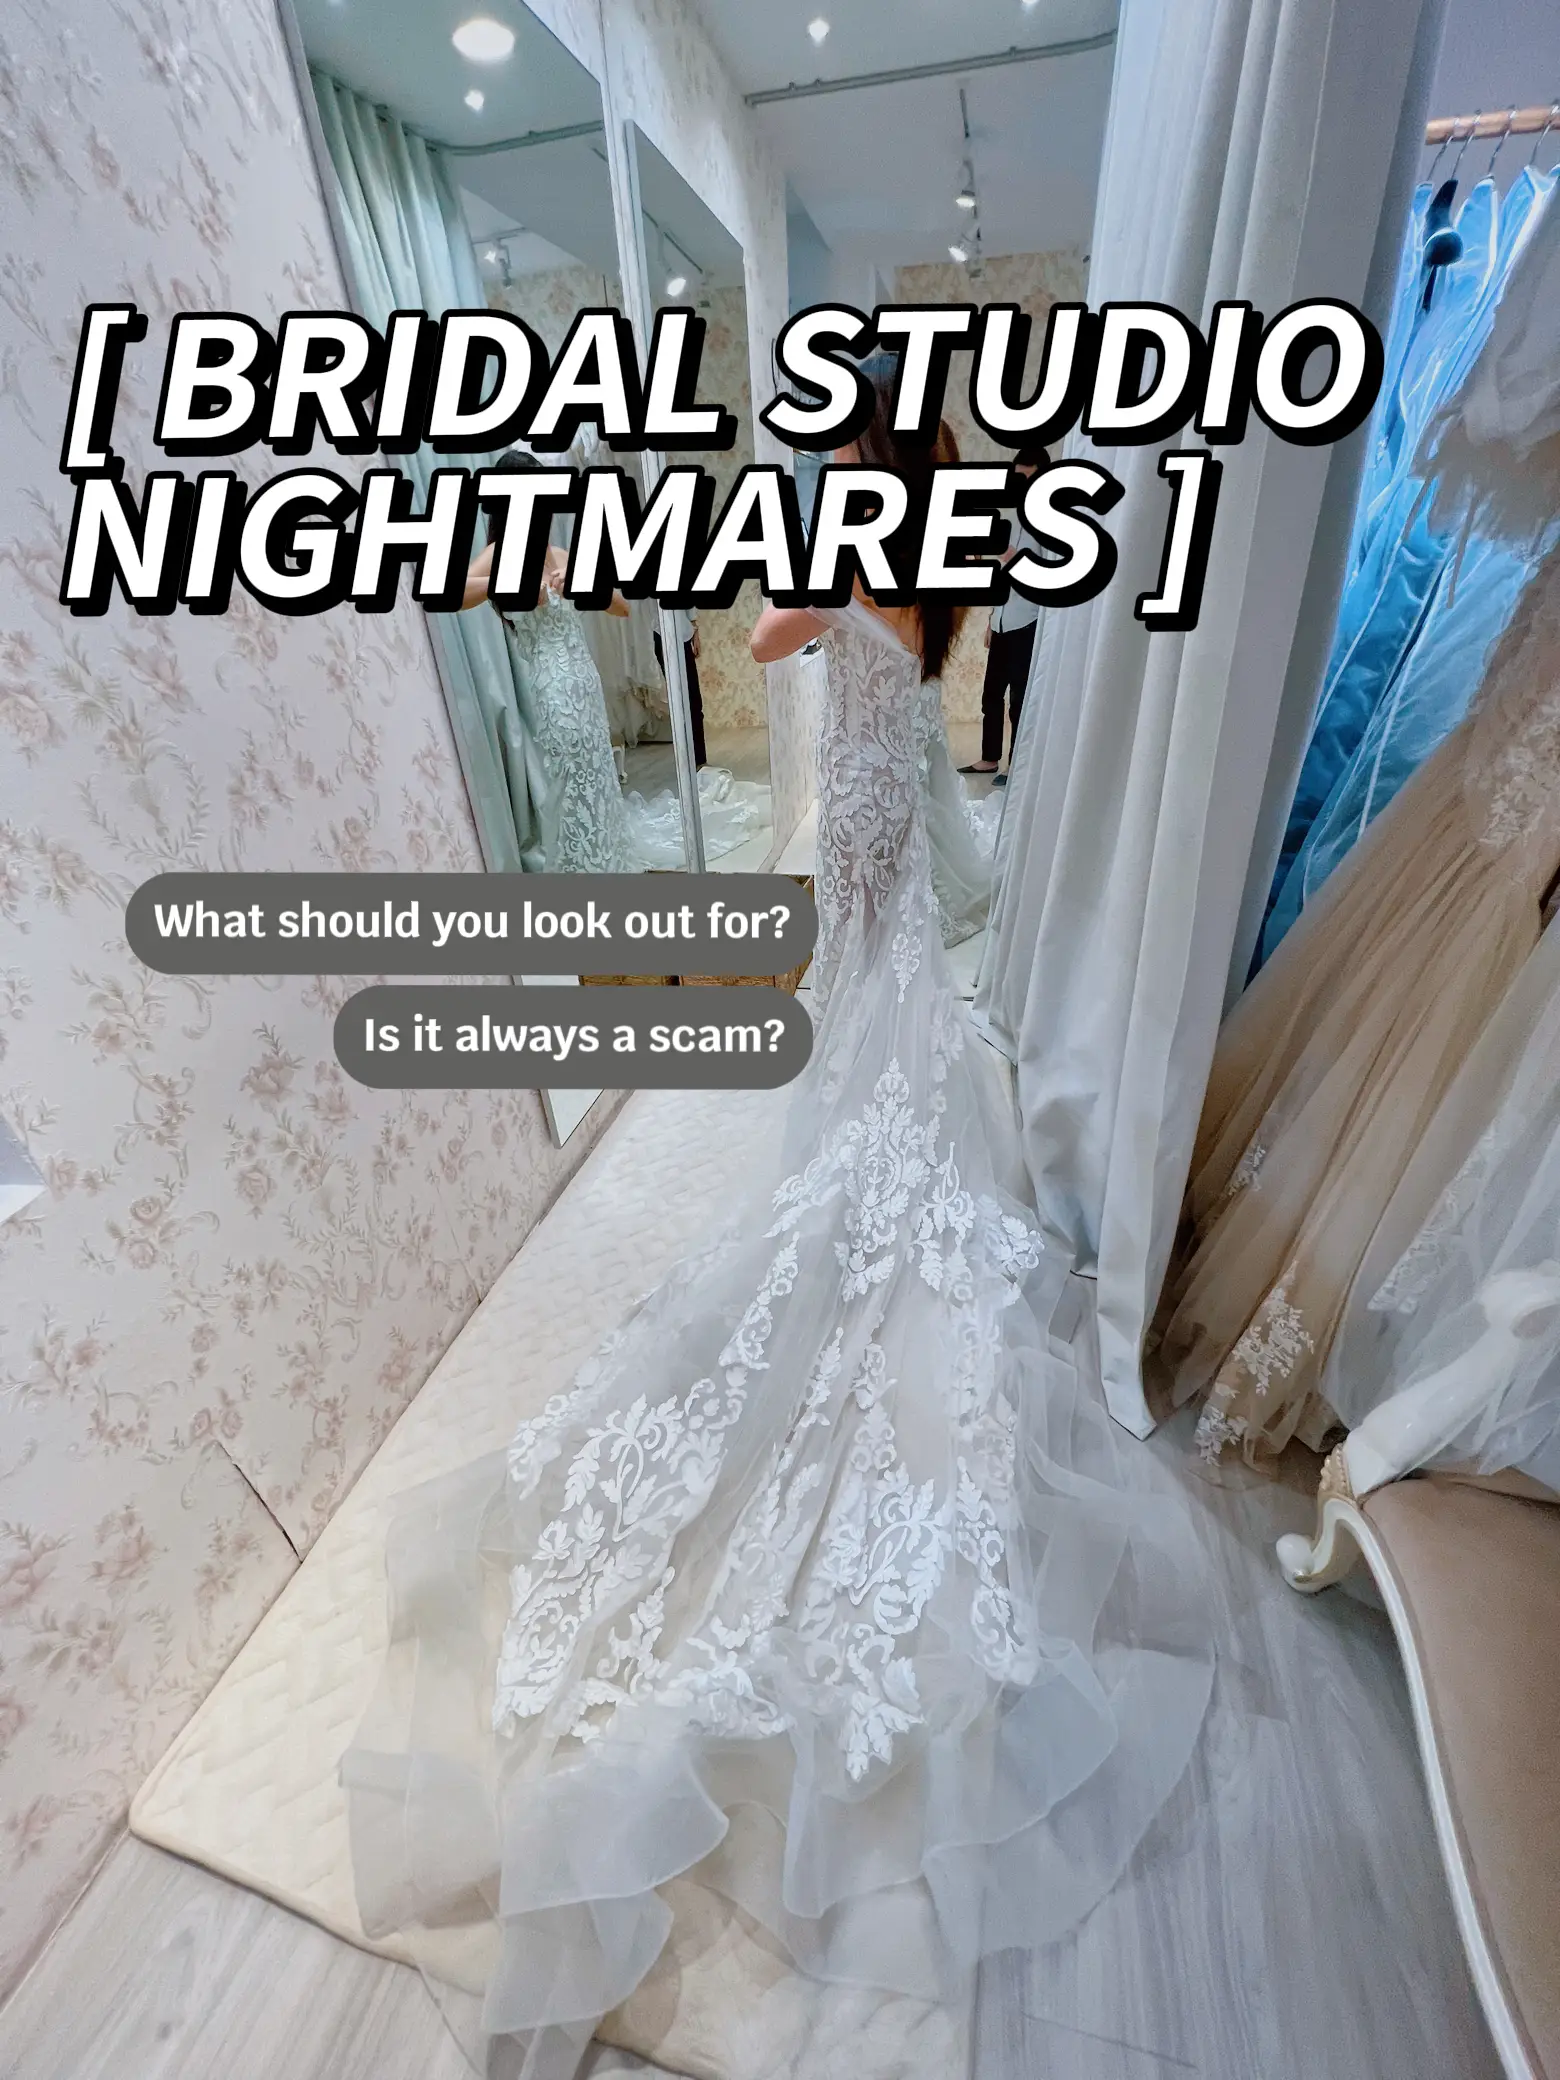 Edith - WeddingCrafters  Top Recommended Bridal Studio in Singapore